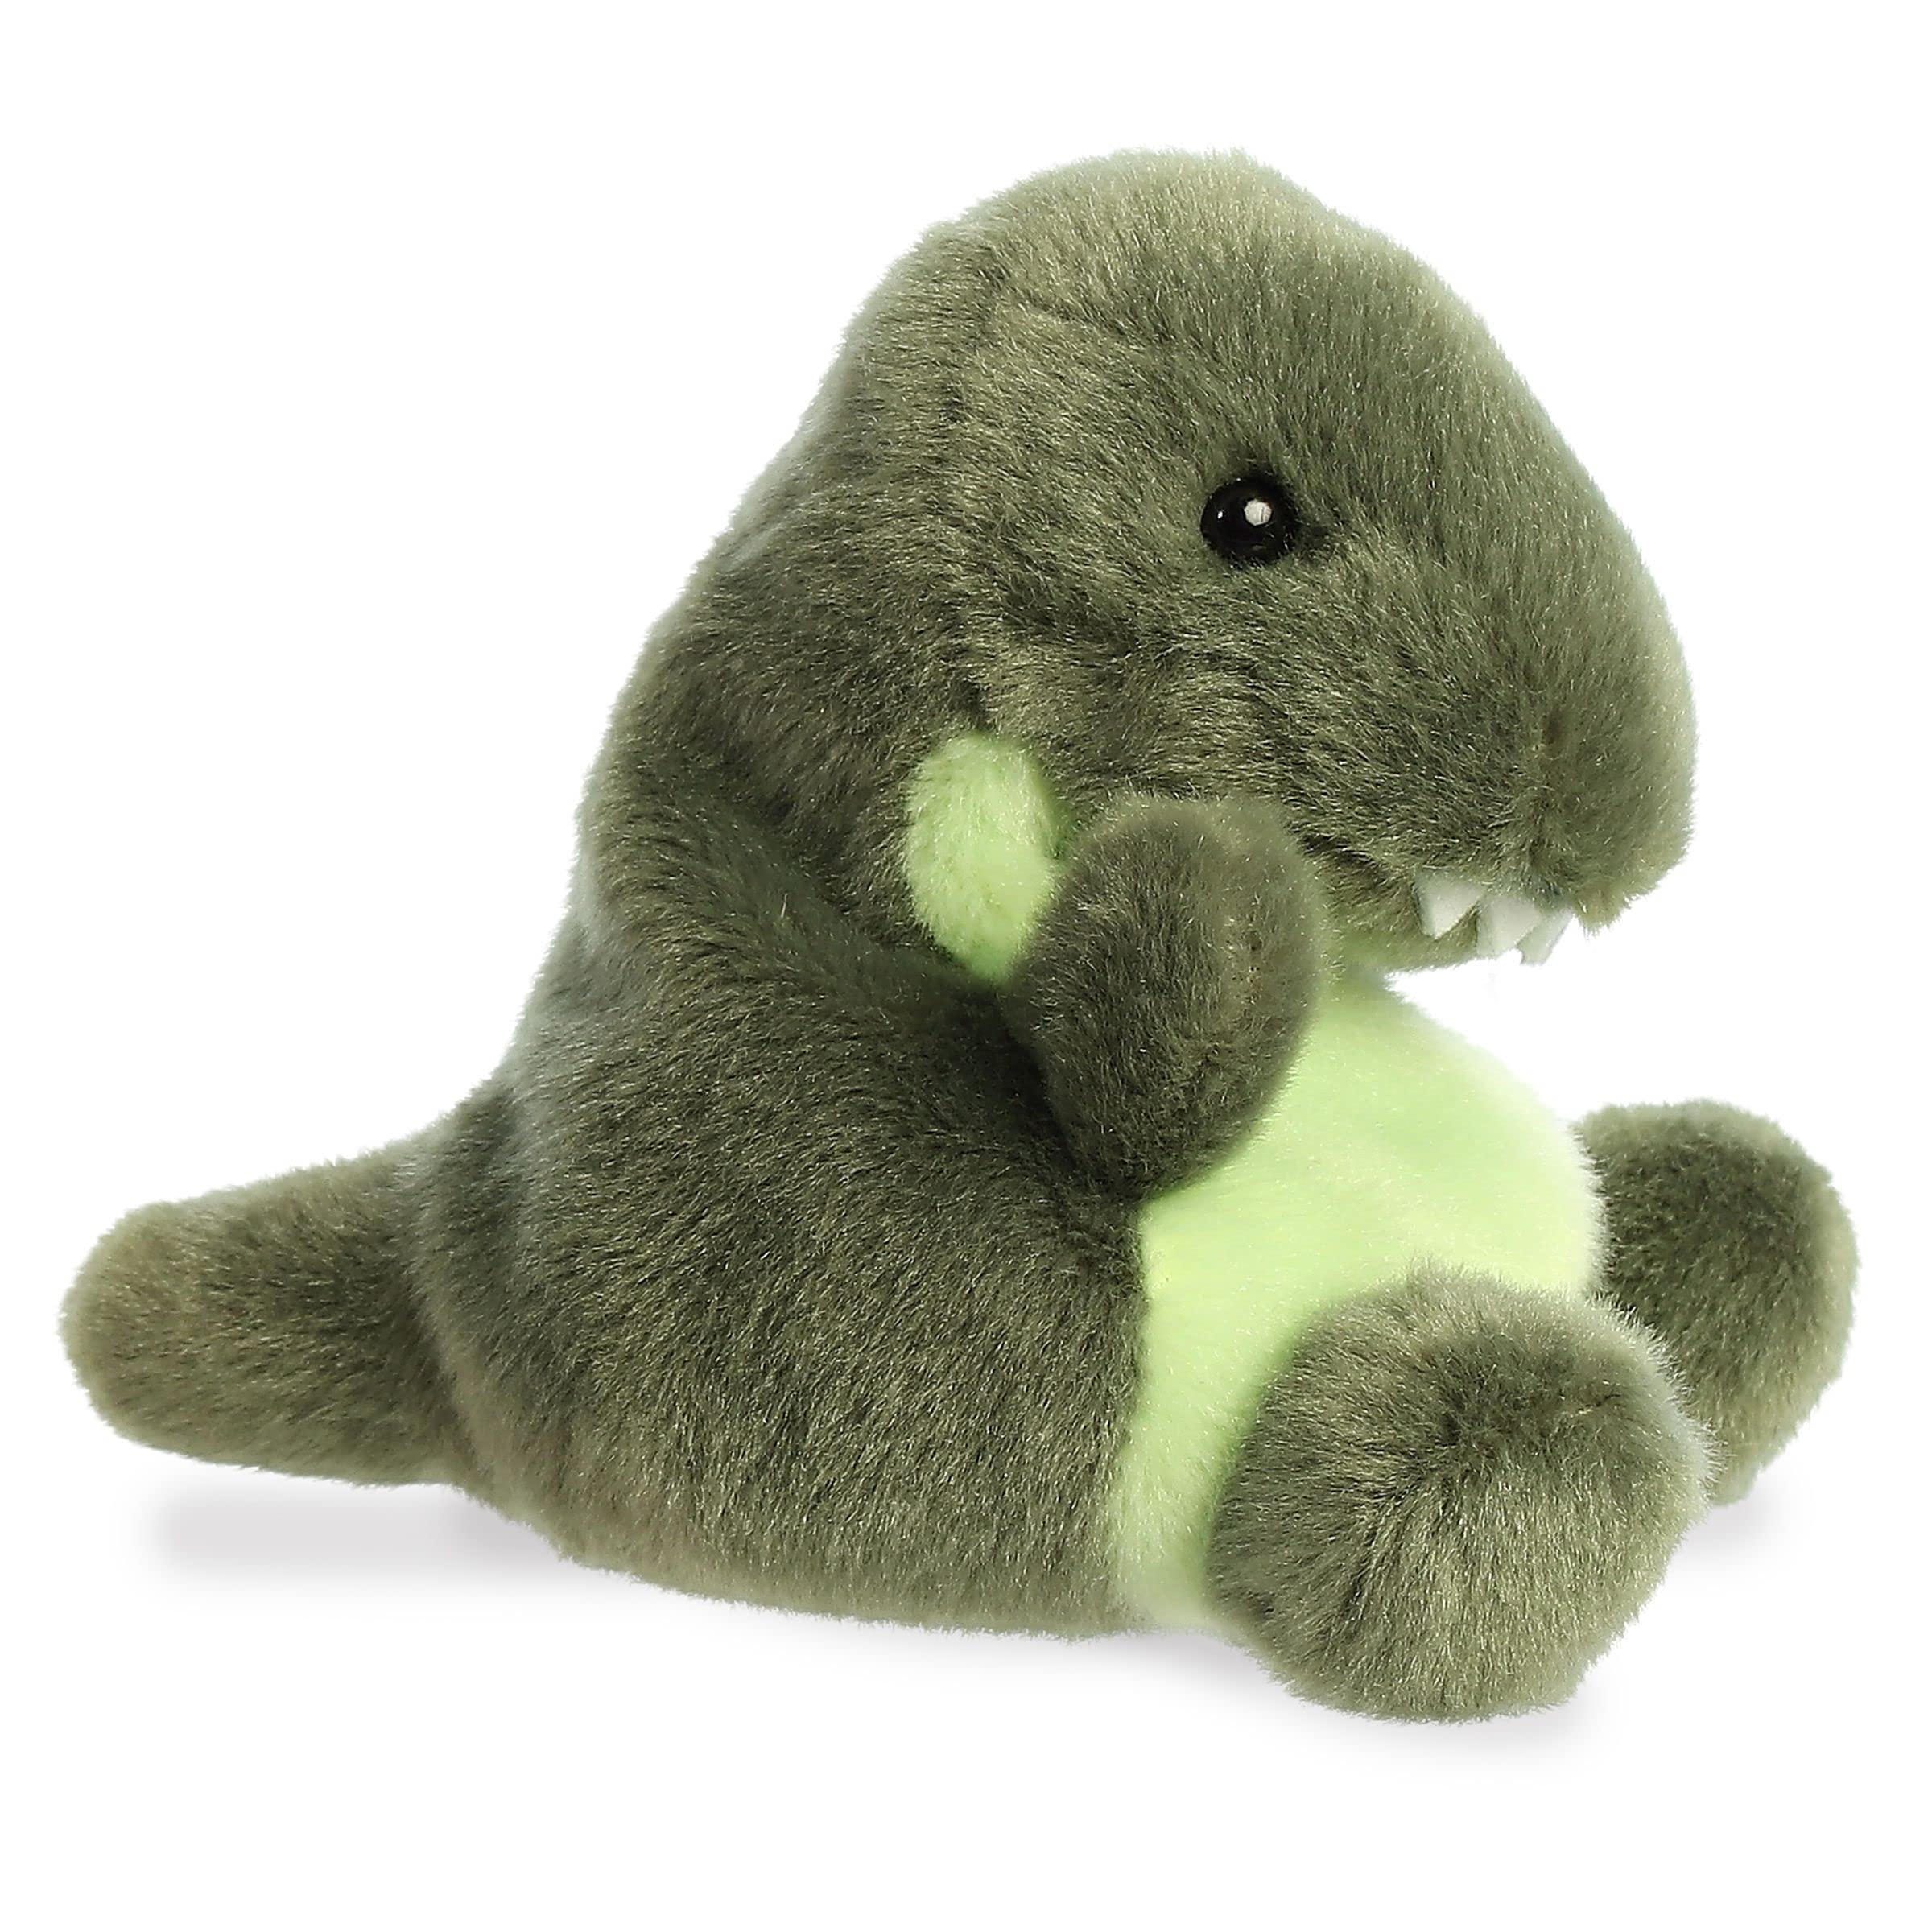 Aurora® Adorable Palm Pals™ Tyranno Rex™ Stuffed Animal - Pocket-Sized Play - Collectable Fun - Green 5 Inches